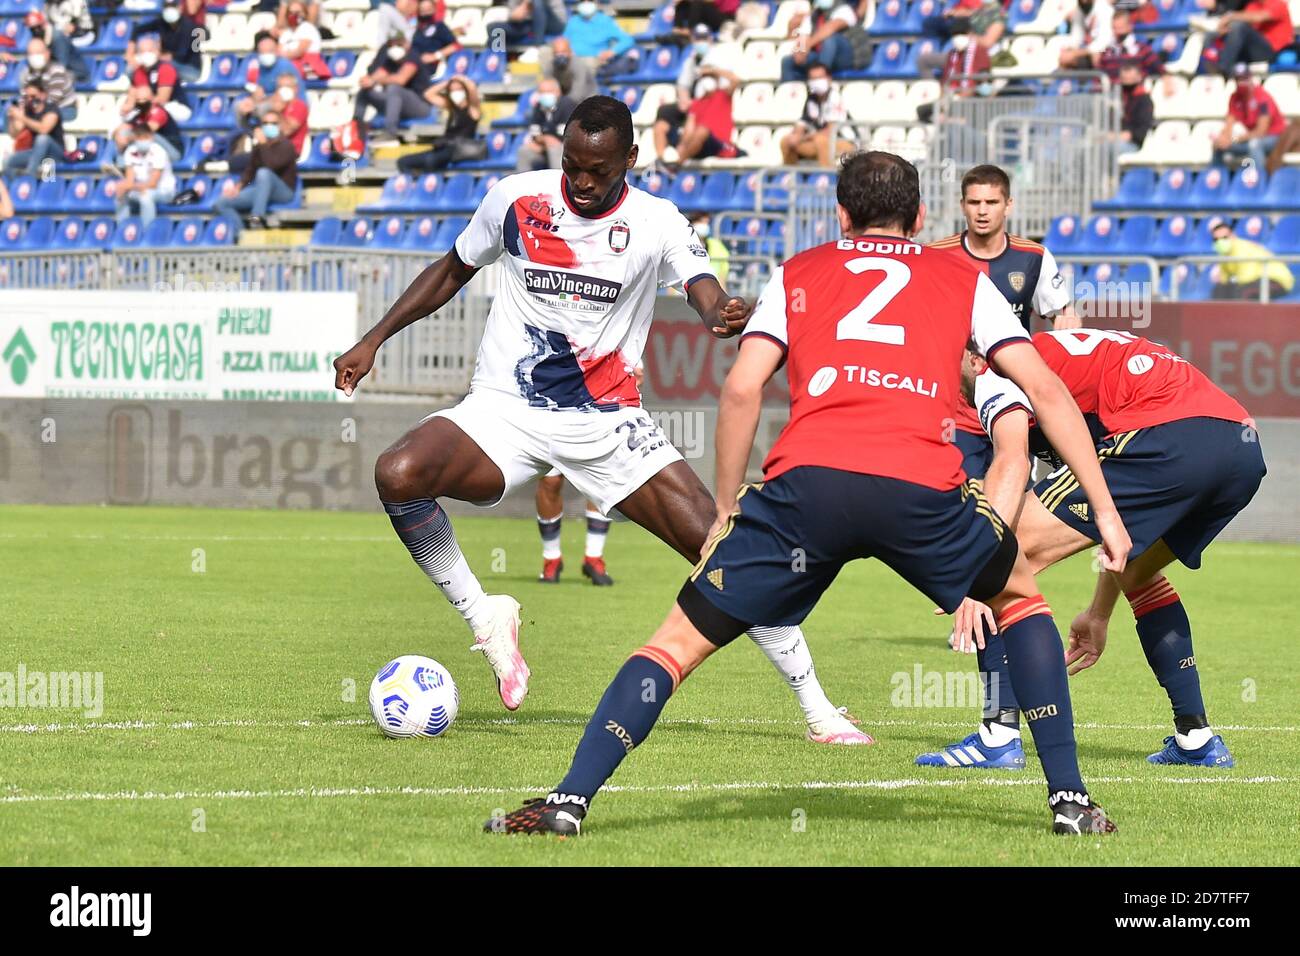 Fc Crotone High Resolution Stock Photography and Images - Alamy